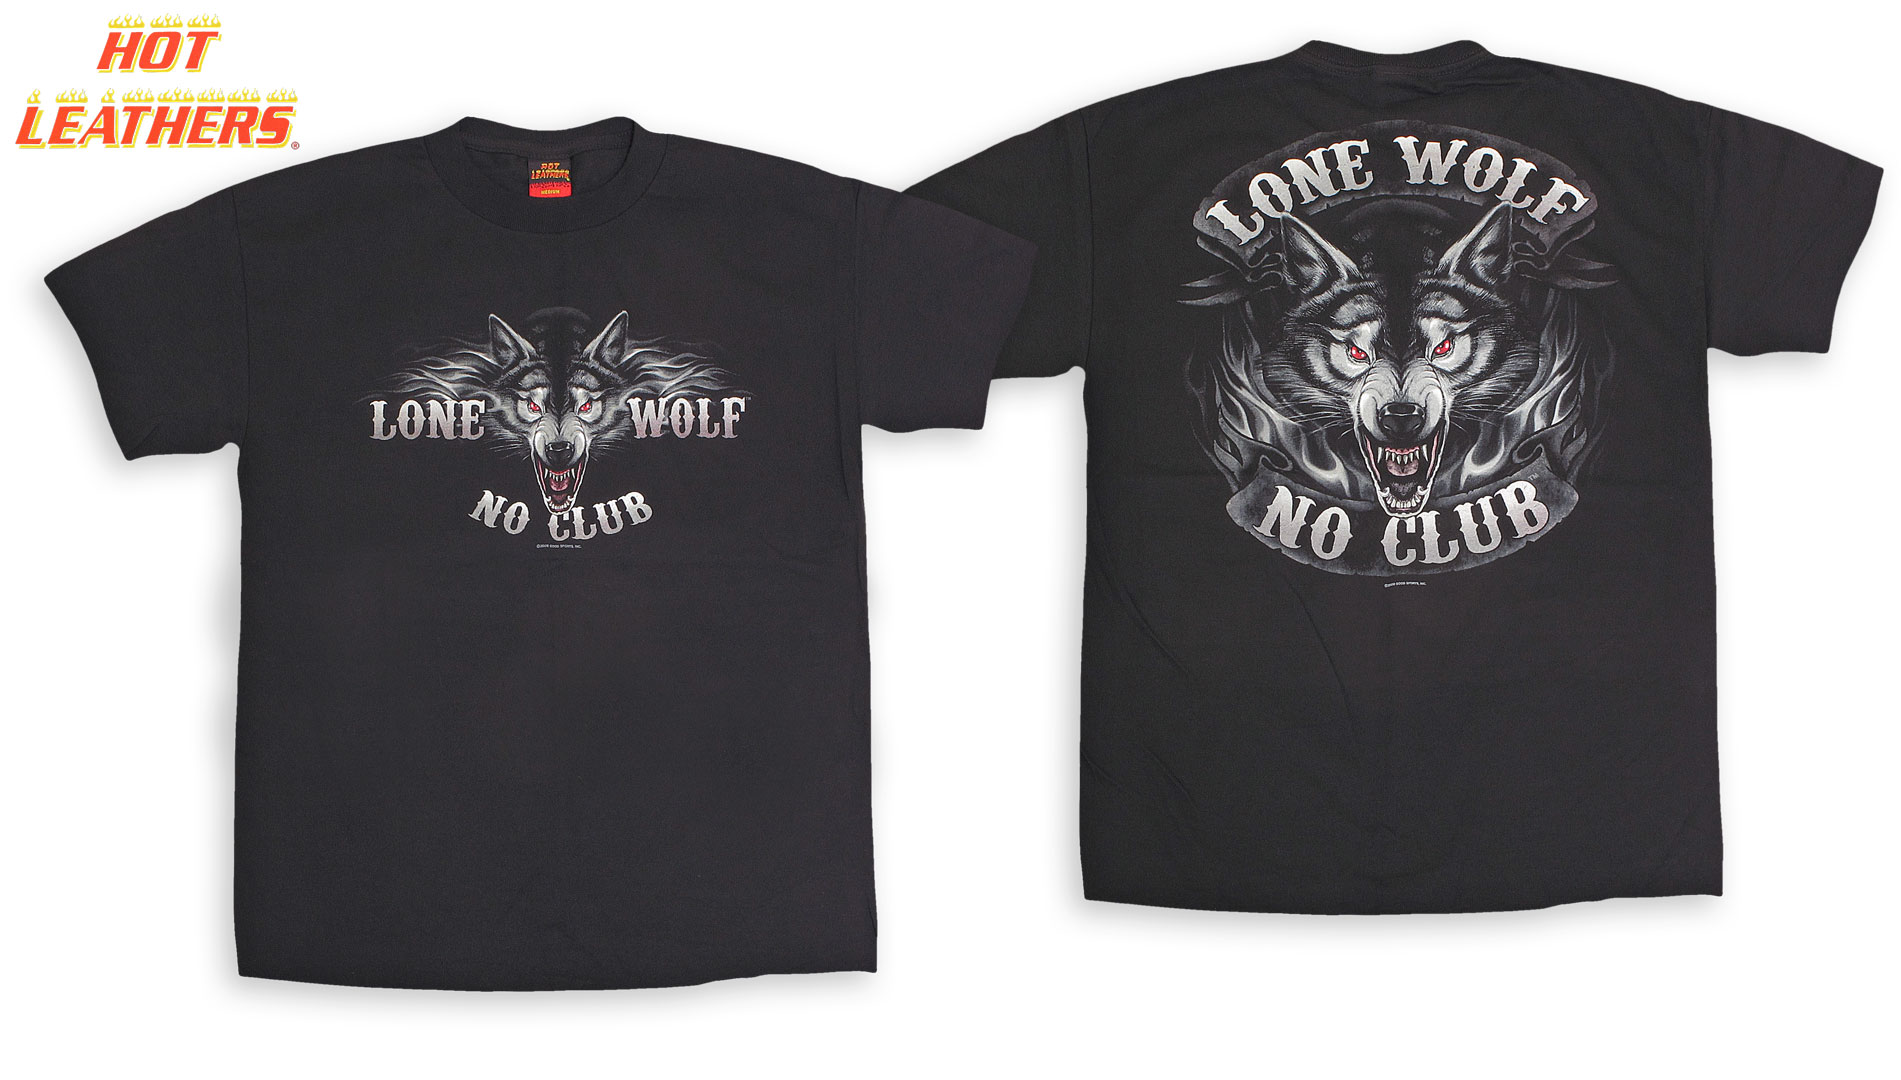  "Lone Wolf" Black  Hot Leathers